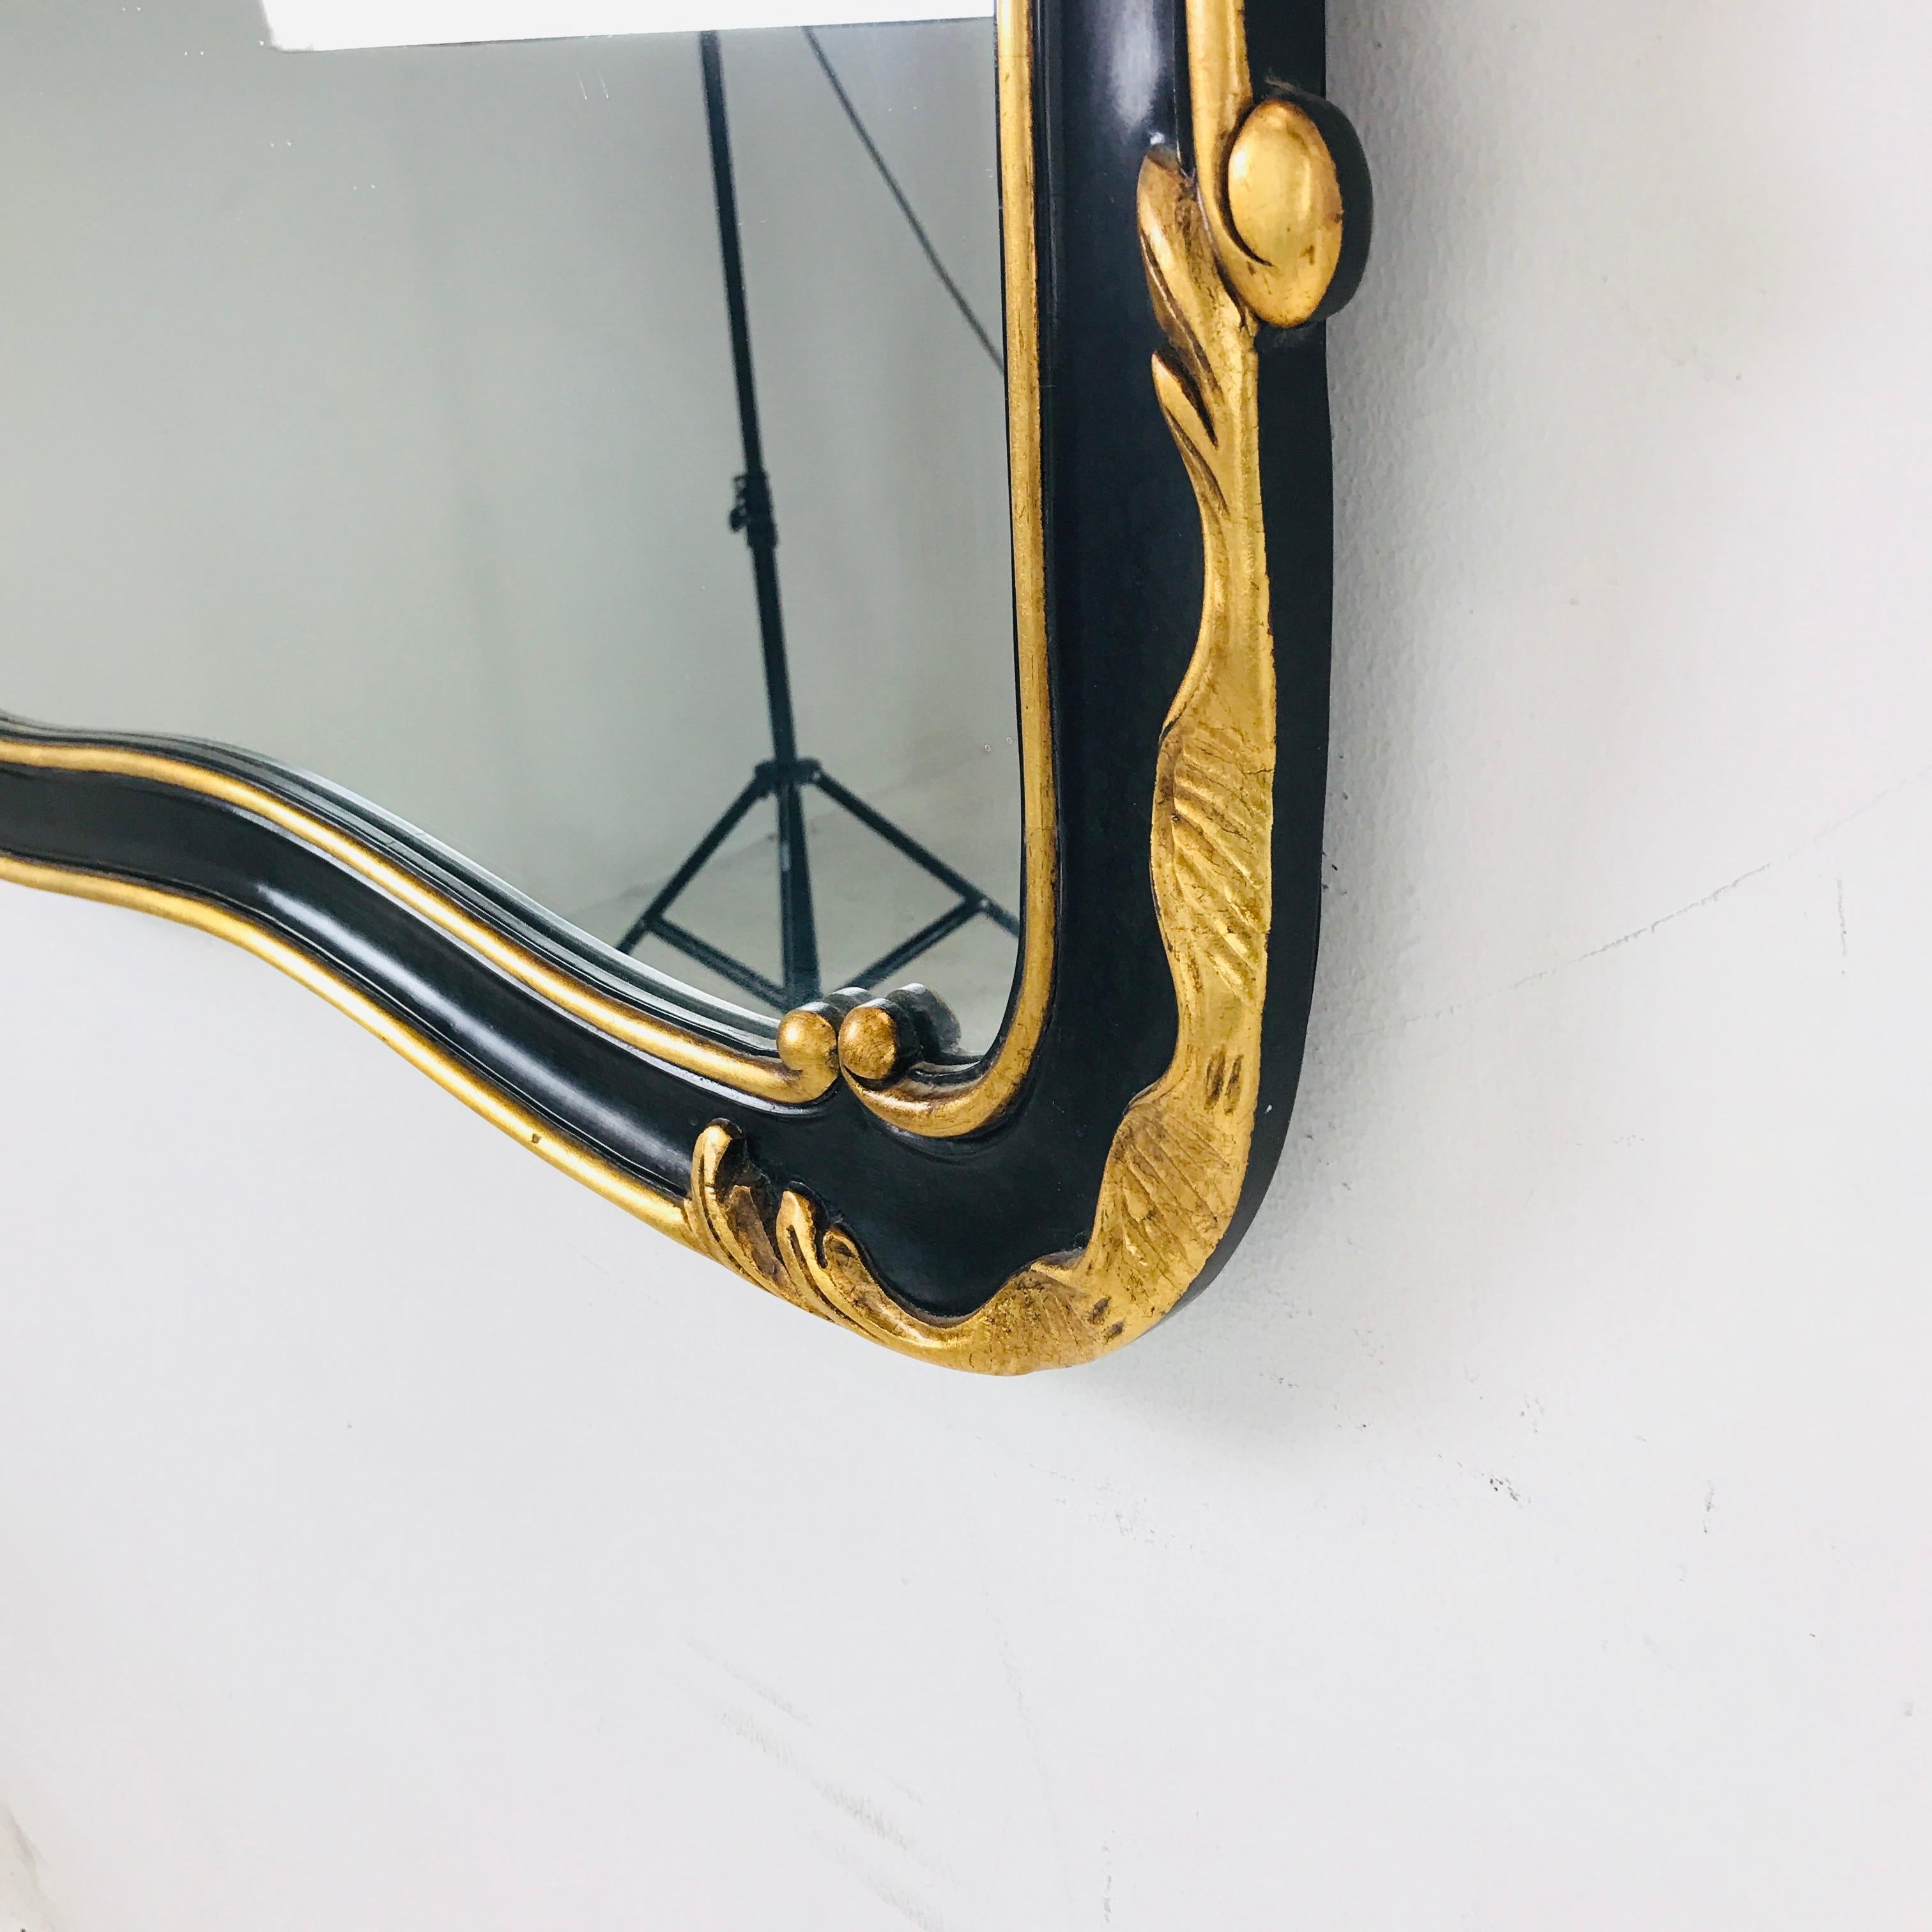 Gilt French Antique Style Mirror by John Widdicomb